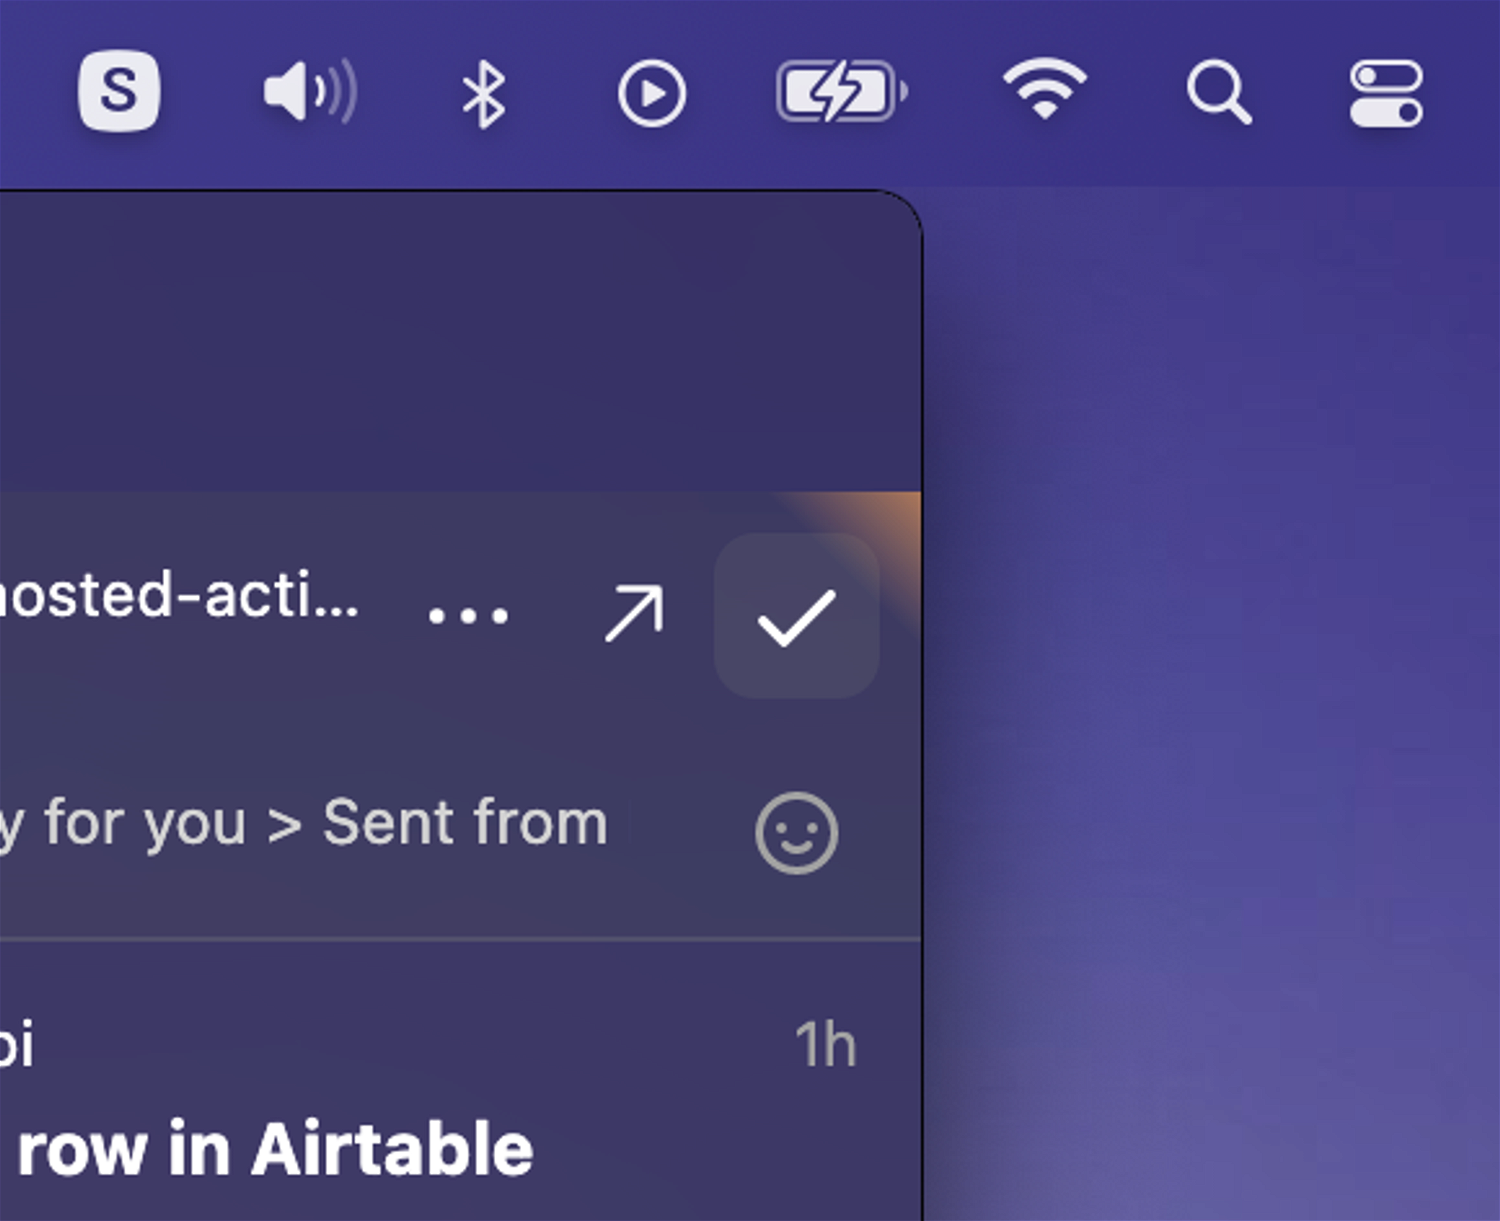 Actionable notifications are now more subtle.